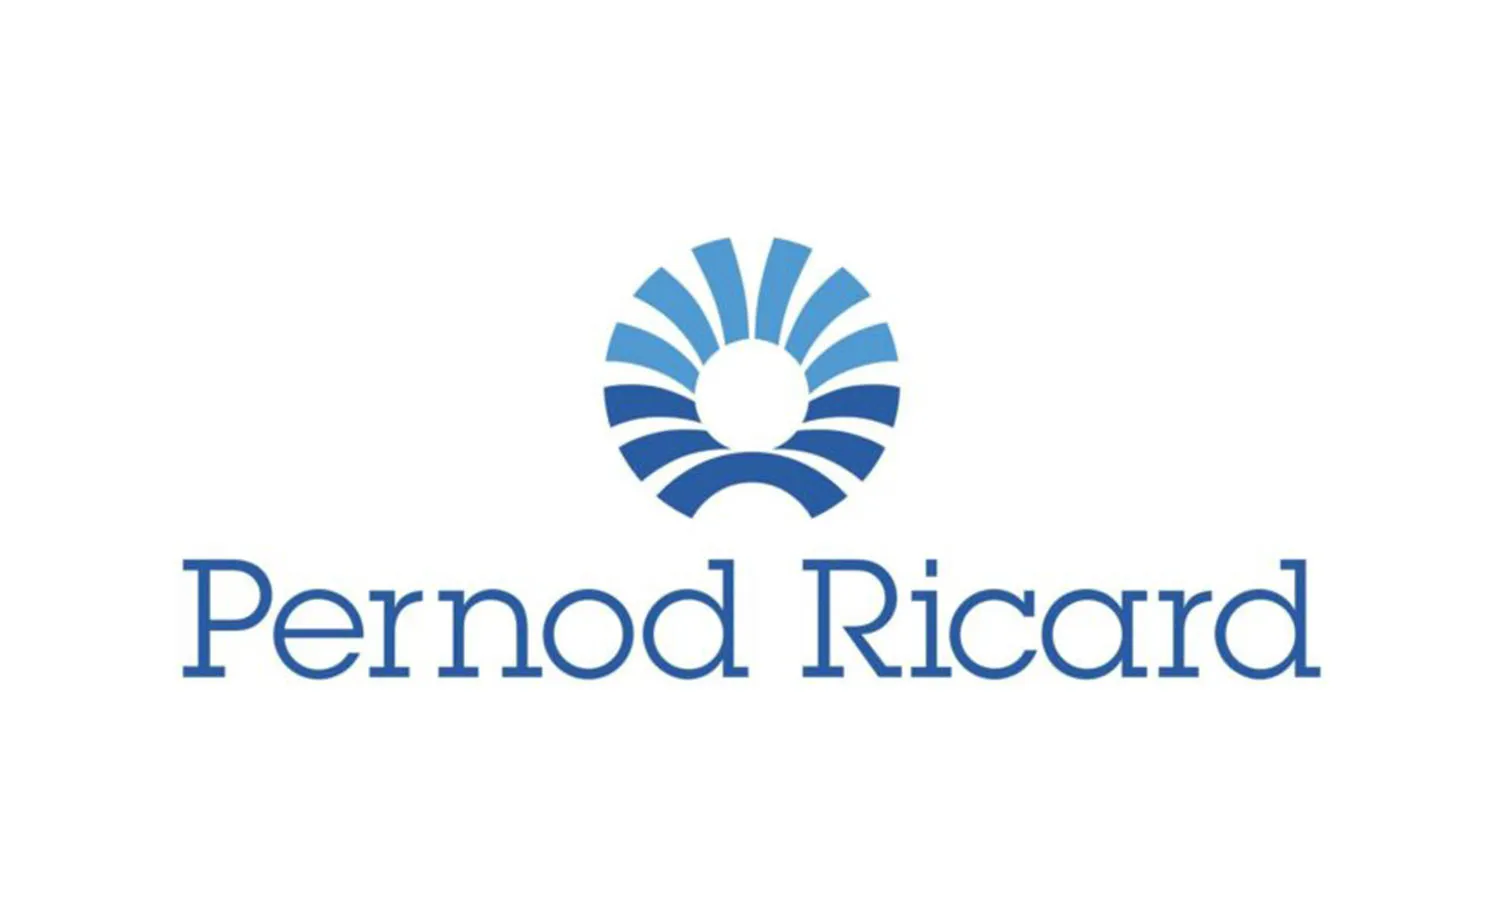 Pernod sales in India grew significantly in Q3